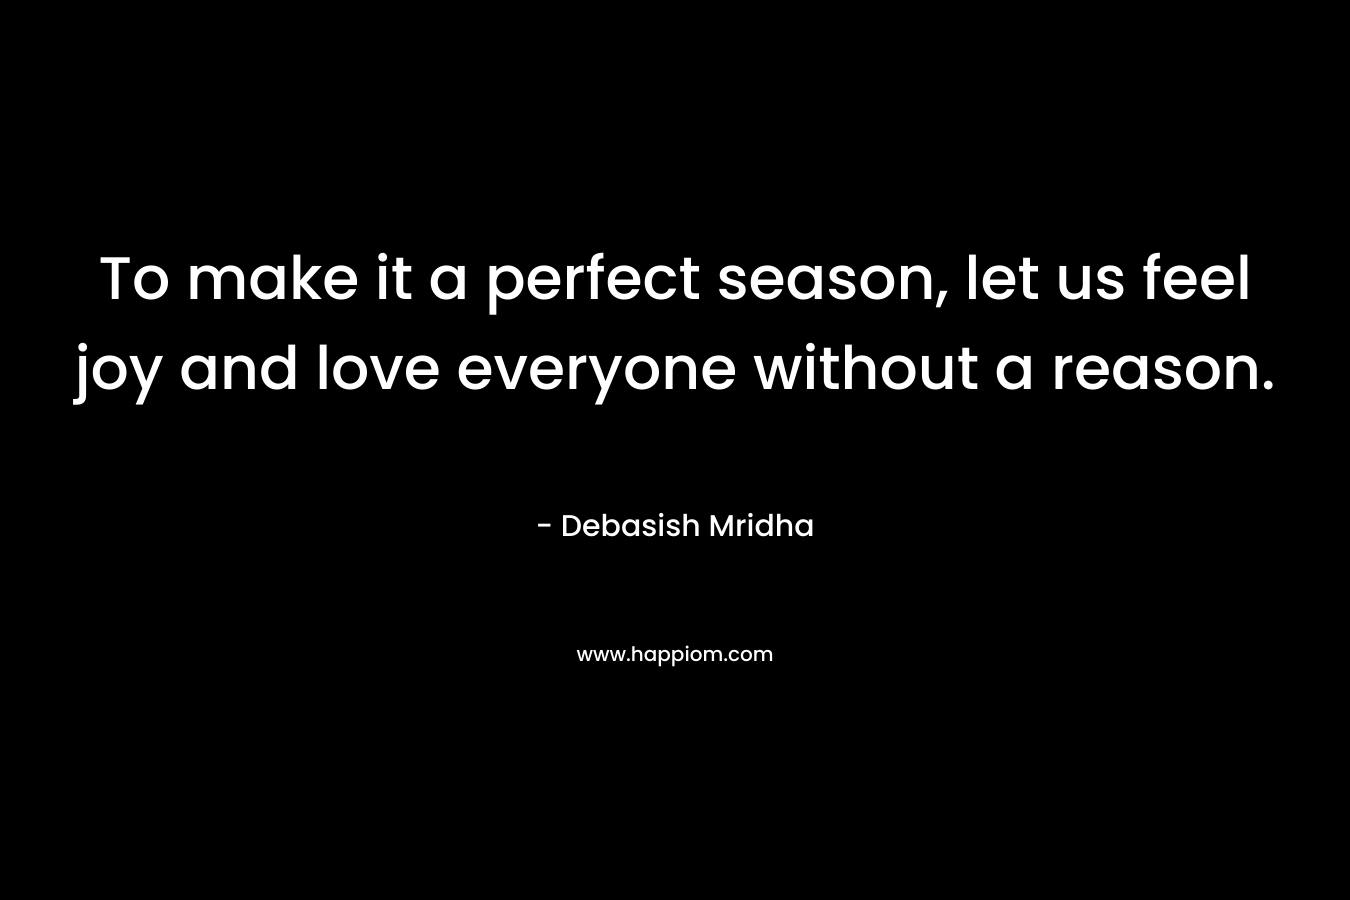 To make it a perfect season, let us feel joy and love everyone without a reason.